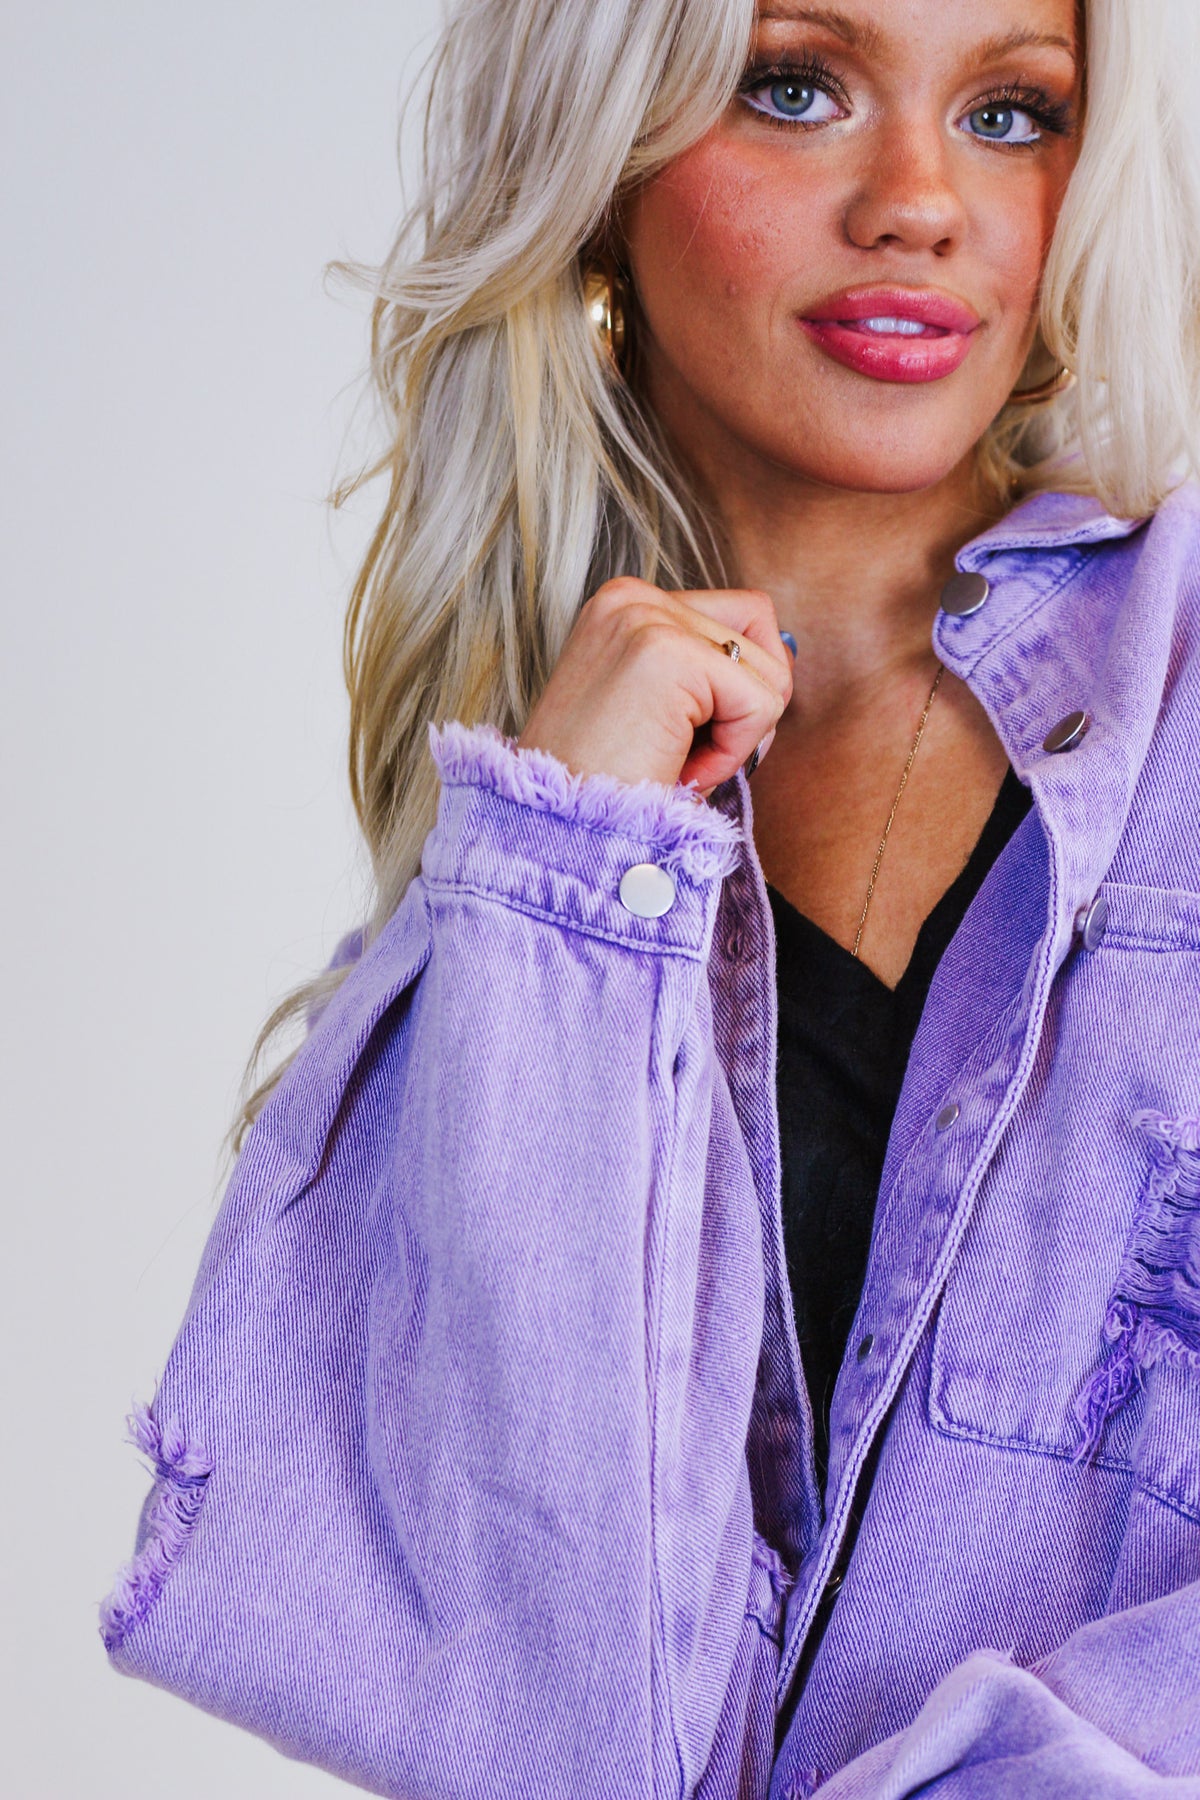 Feel The Warmth Grape Casual Jean Jacket